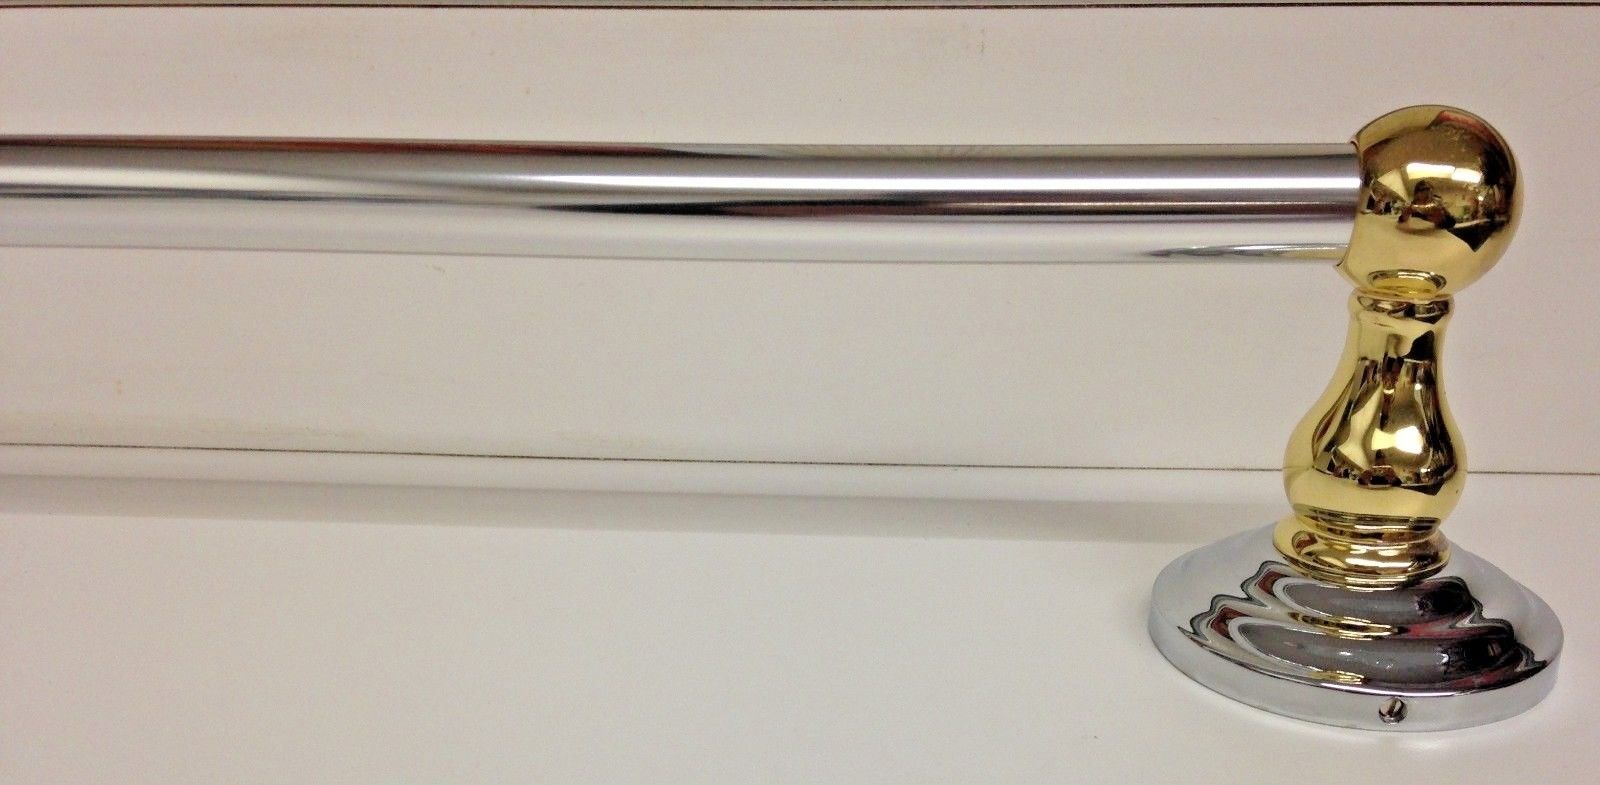 Taymor 04-CB6224 Brentwood 24" x 3/4" Towel Bar (Polished Chrome & Brass Color)